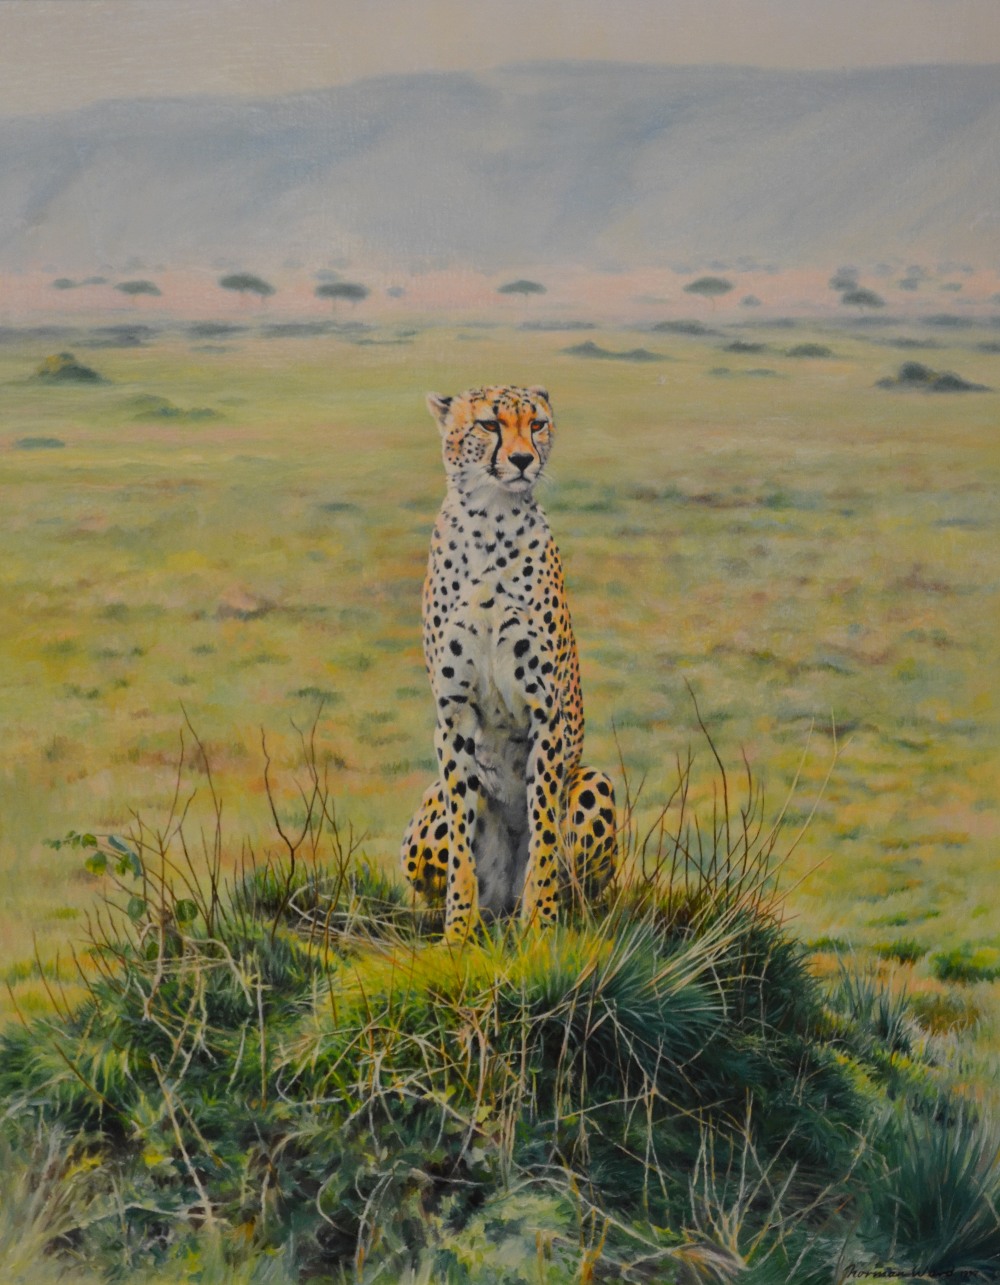 Norman Ward (b. 1960) - 'Cheetah in Maasai Mara', oil on canvas, signed and dated 1997, 74 x 60 cm